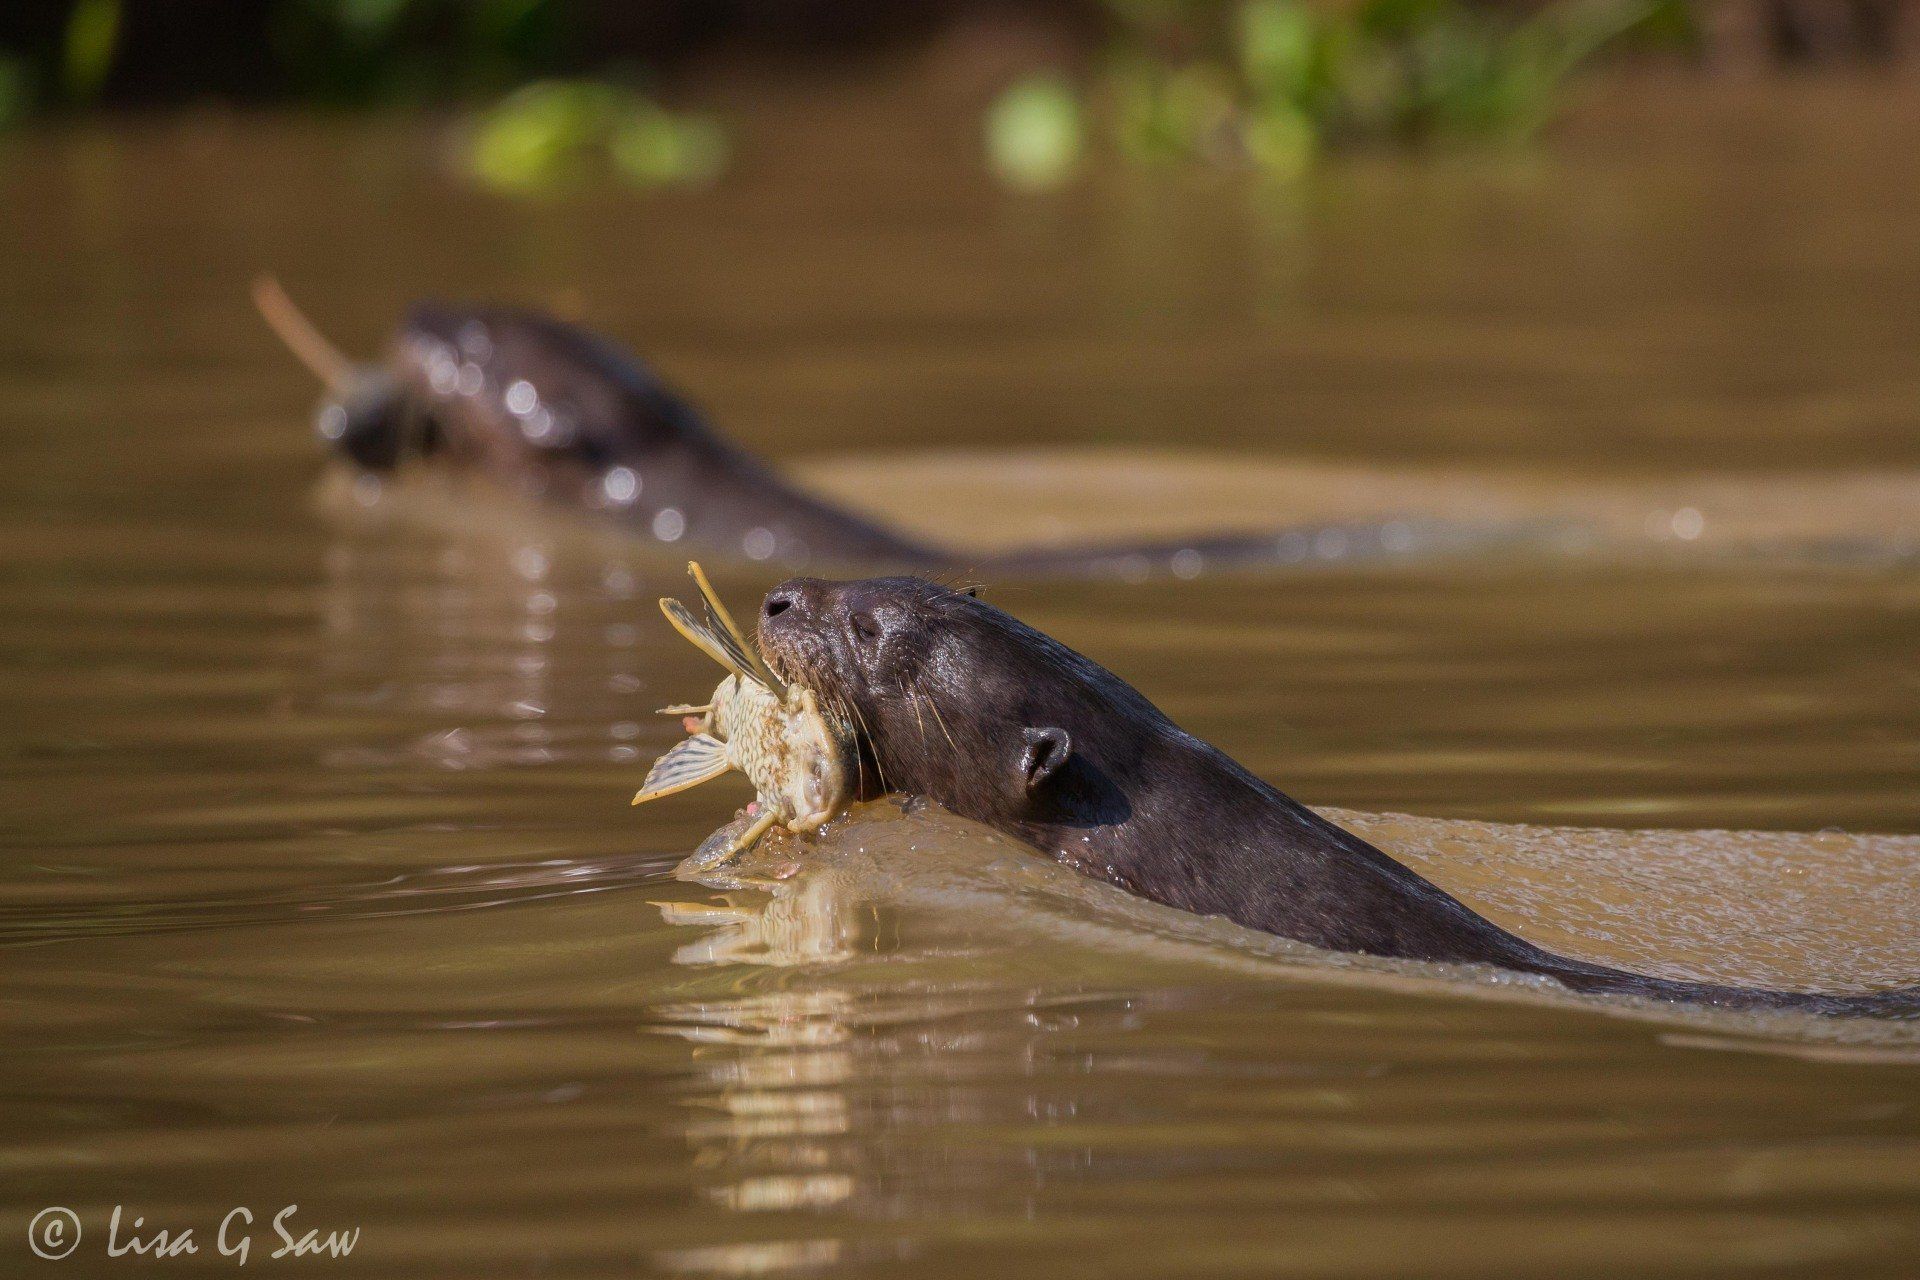 Two Giant River Otters swimming with fish in mouth